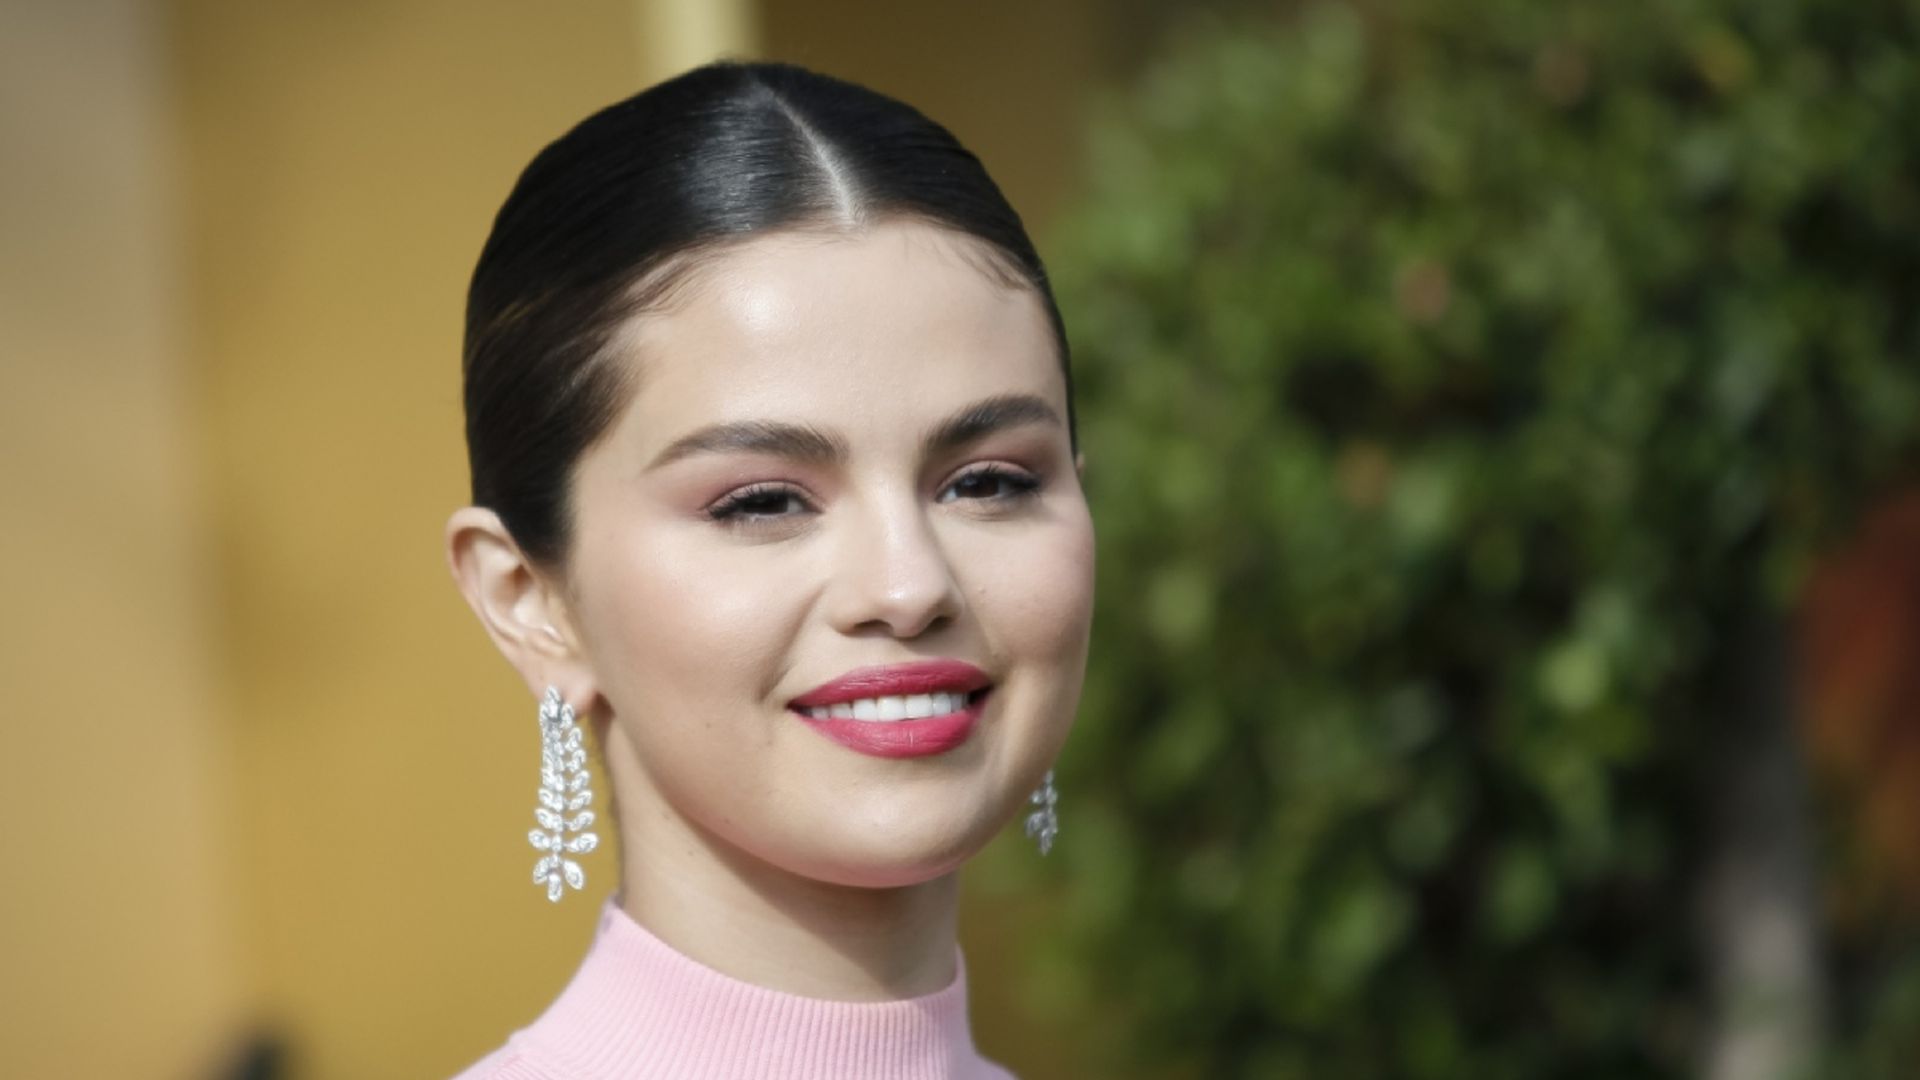 Selena Gomez shares silly video with fans as she celebrates incredible news